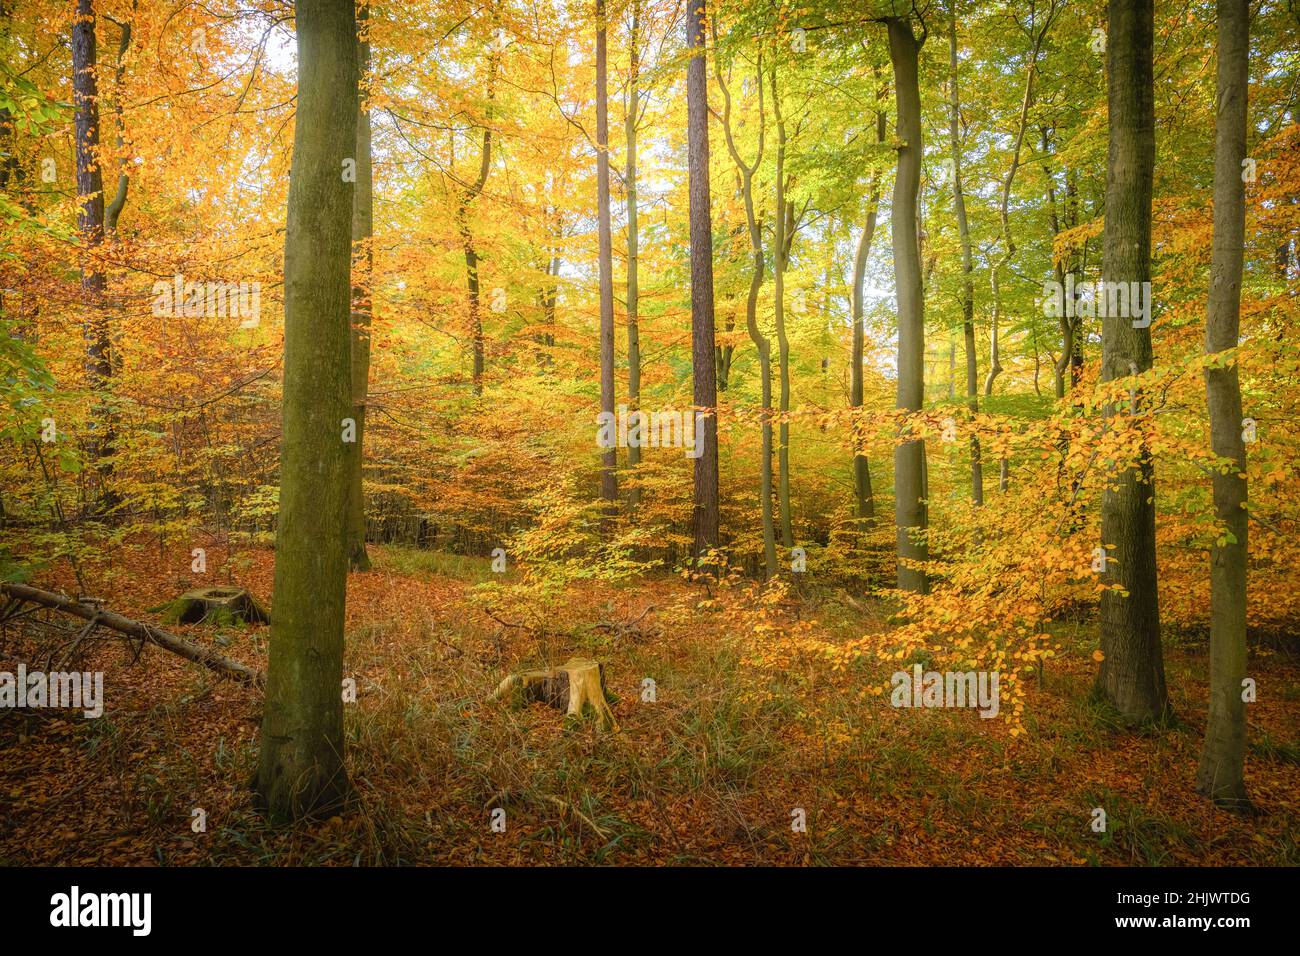 Beech forest in autumn with tree trunks Stock Photo